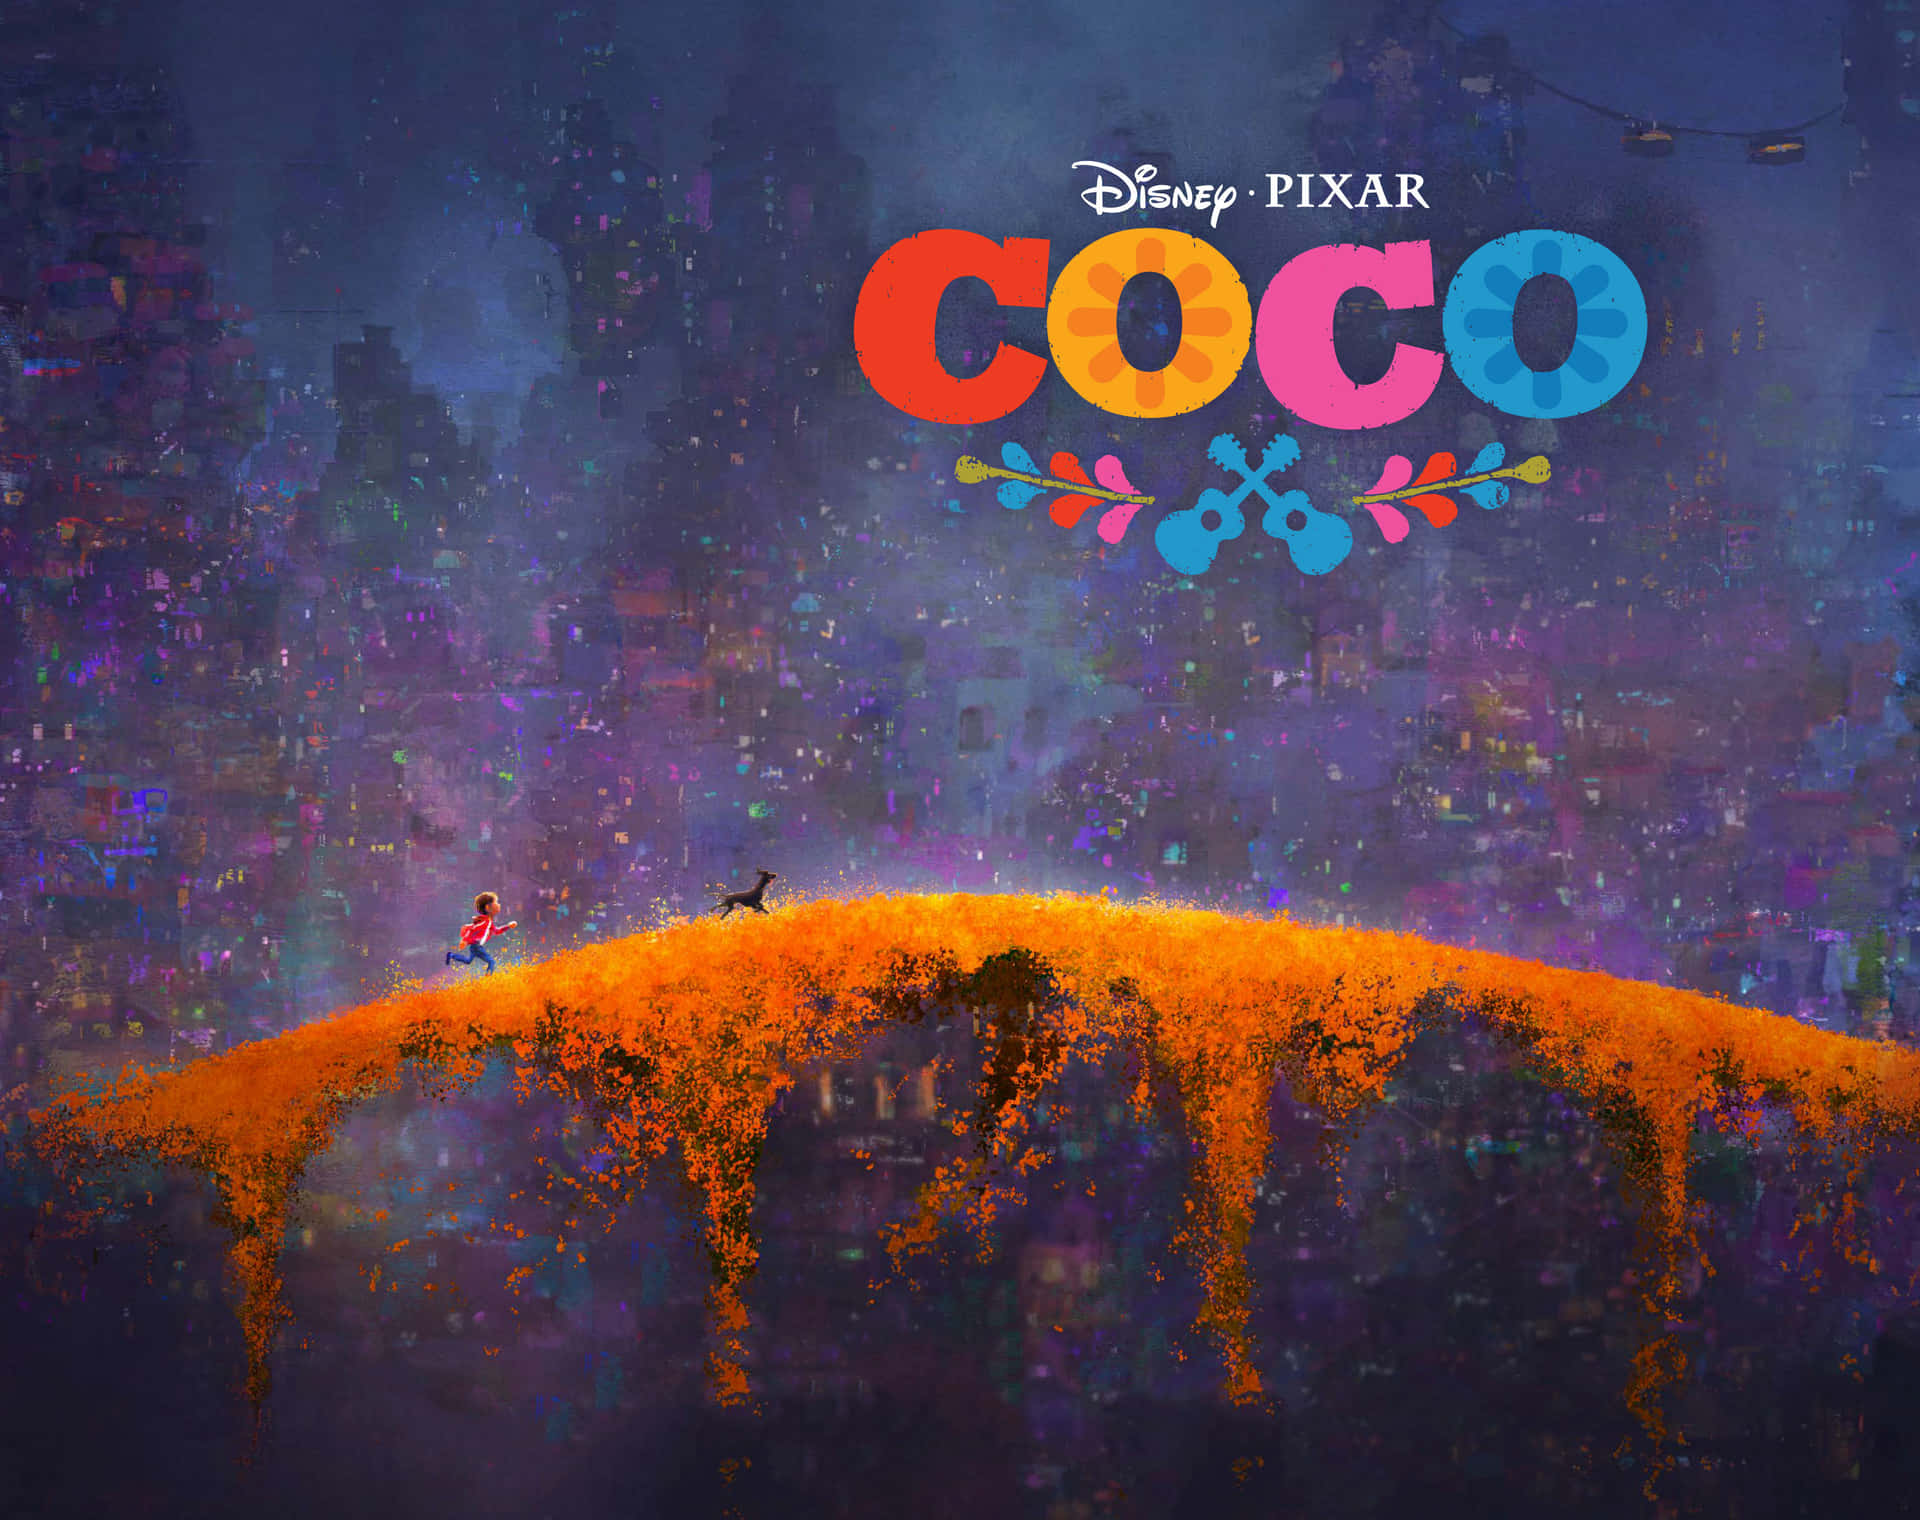 An imaginary journey with Coco to the fantastical Land of the Dead.